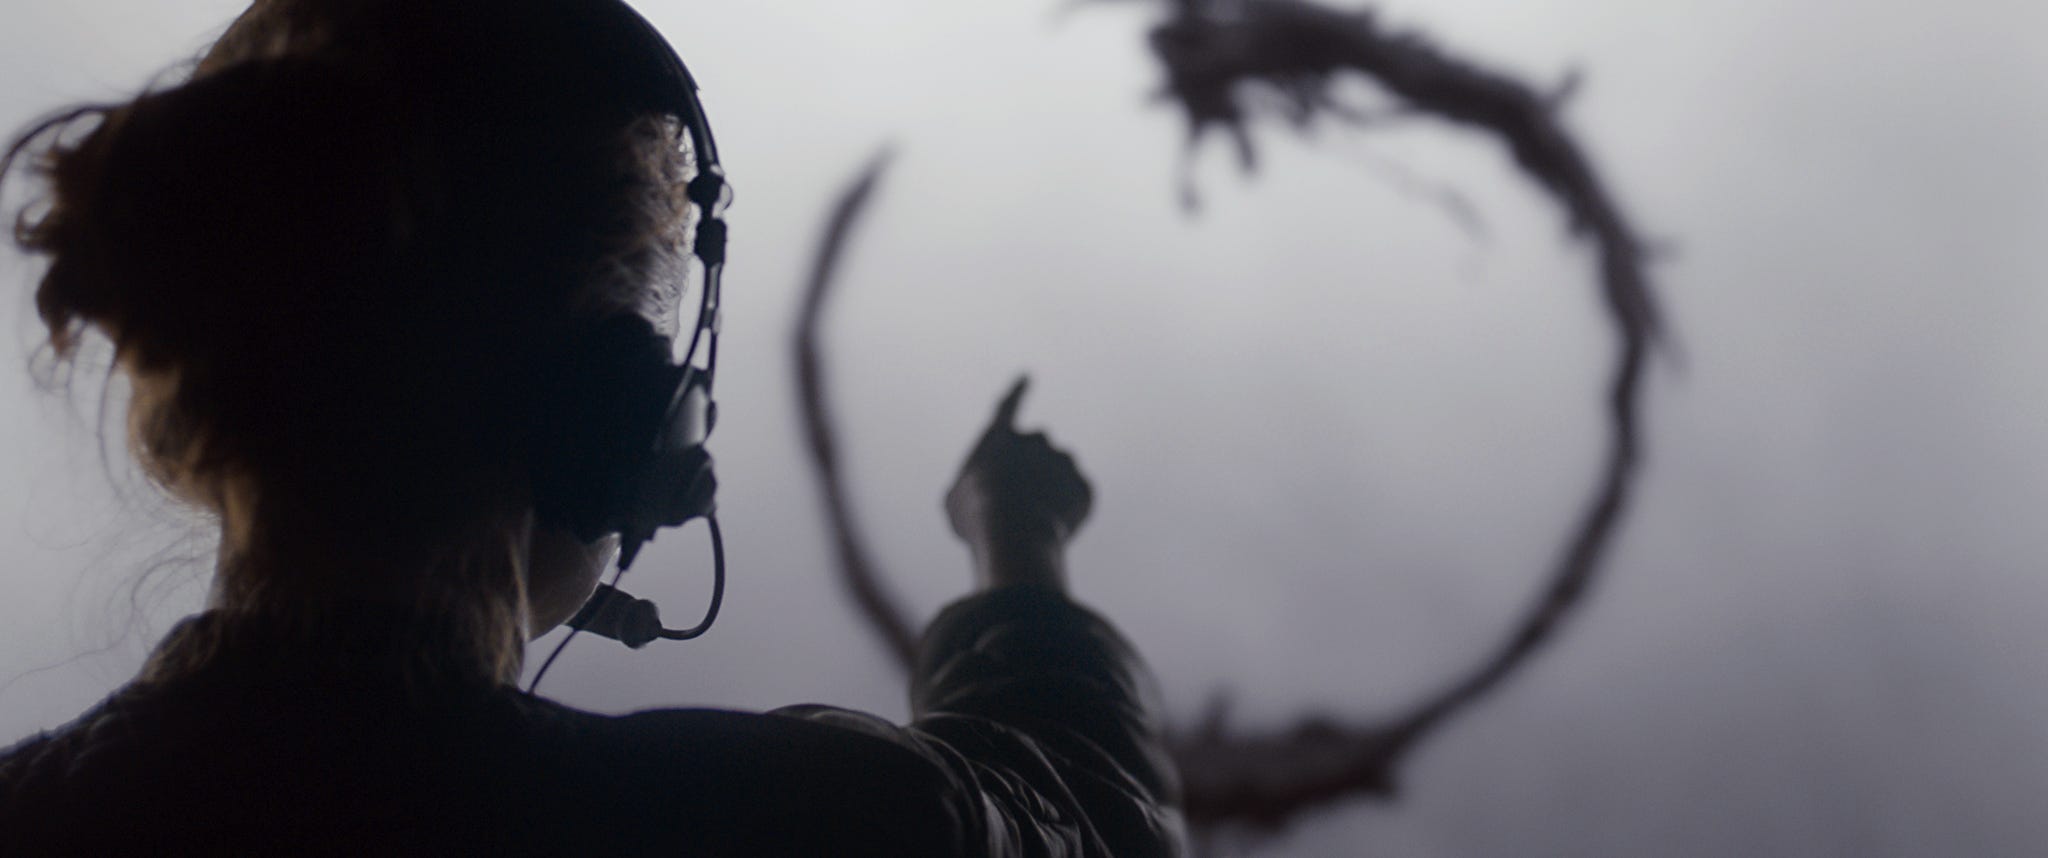 Arrival 2016 Image4